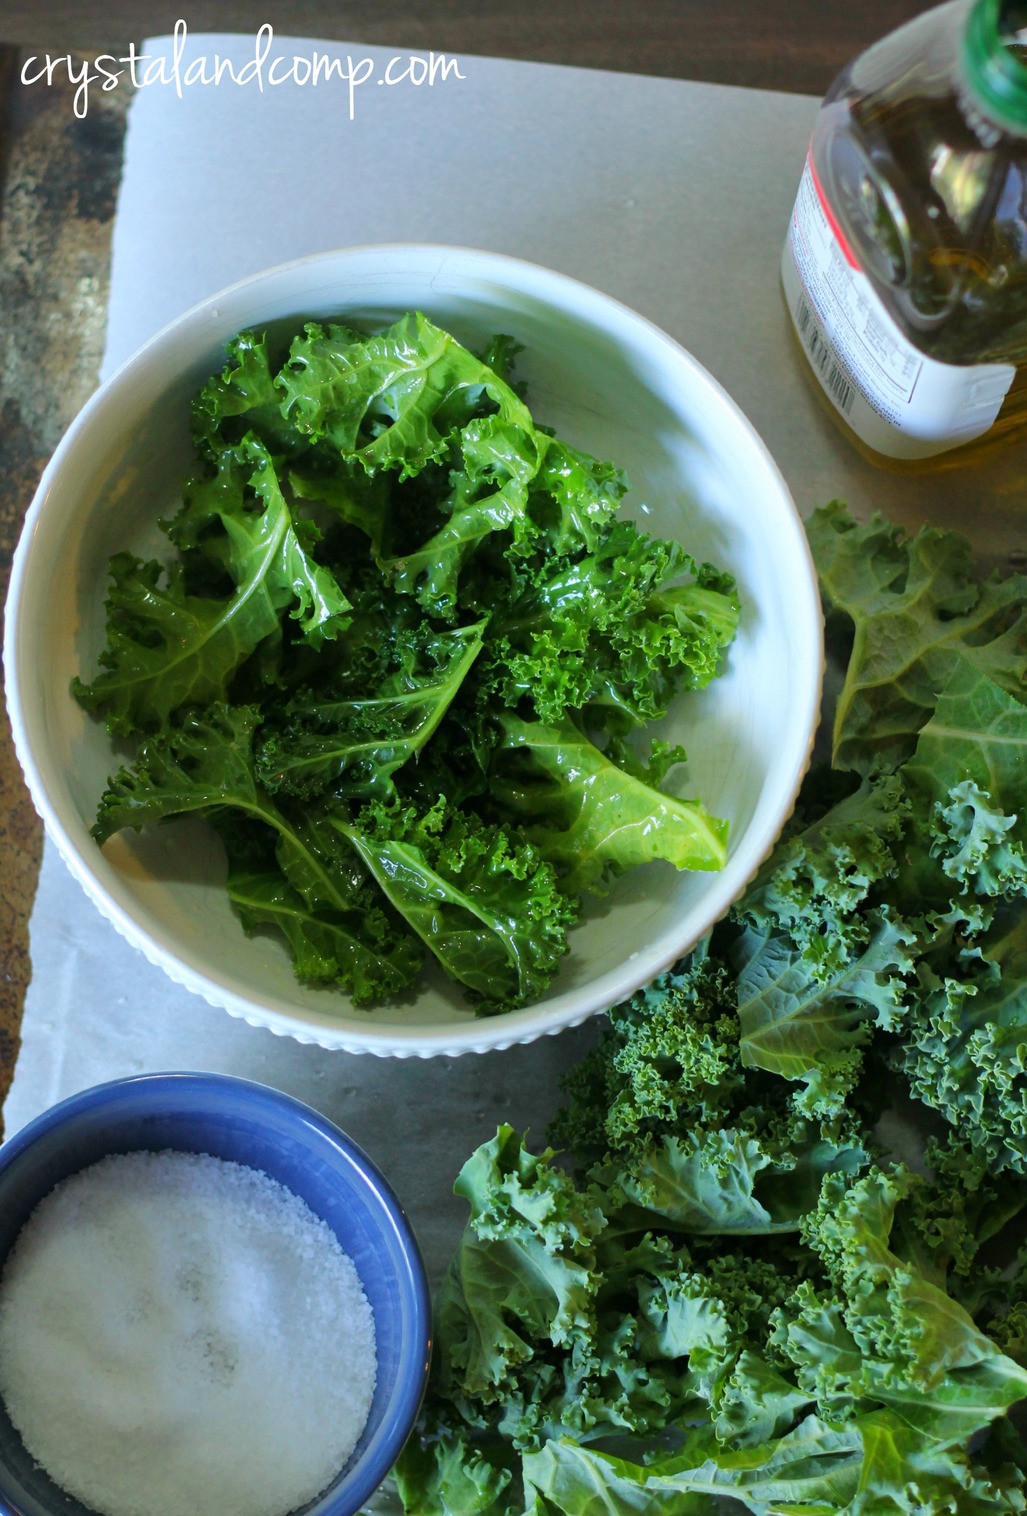 Easiest Way to Make Kale Chips in the Oven